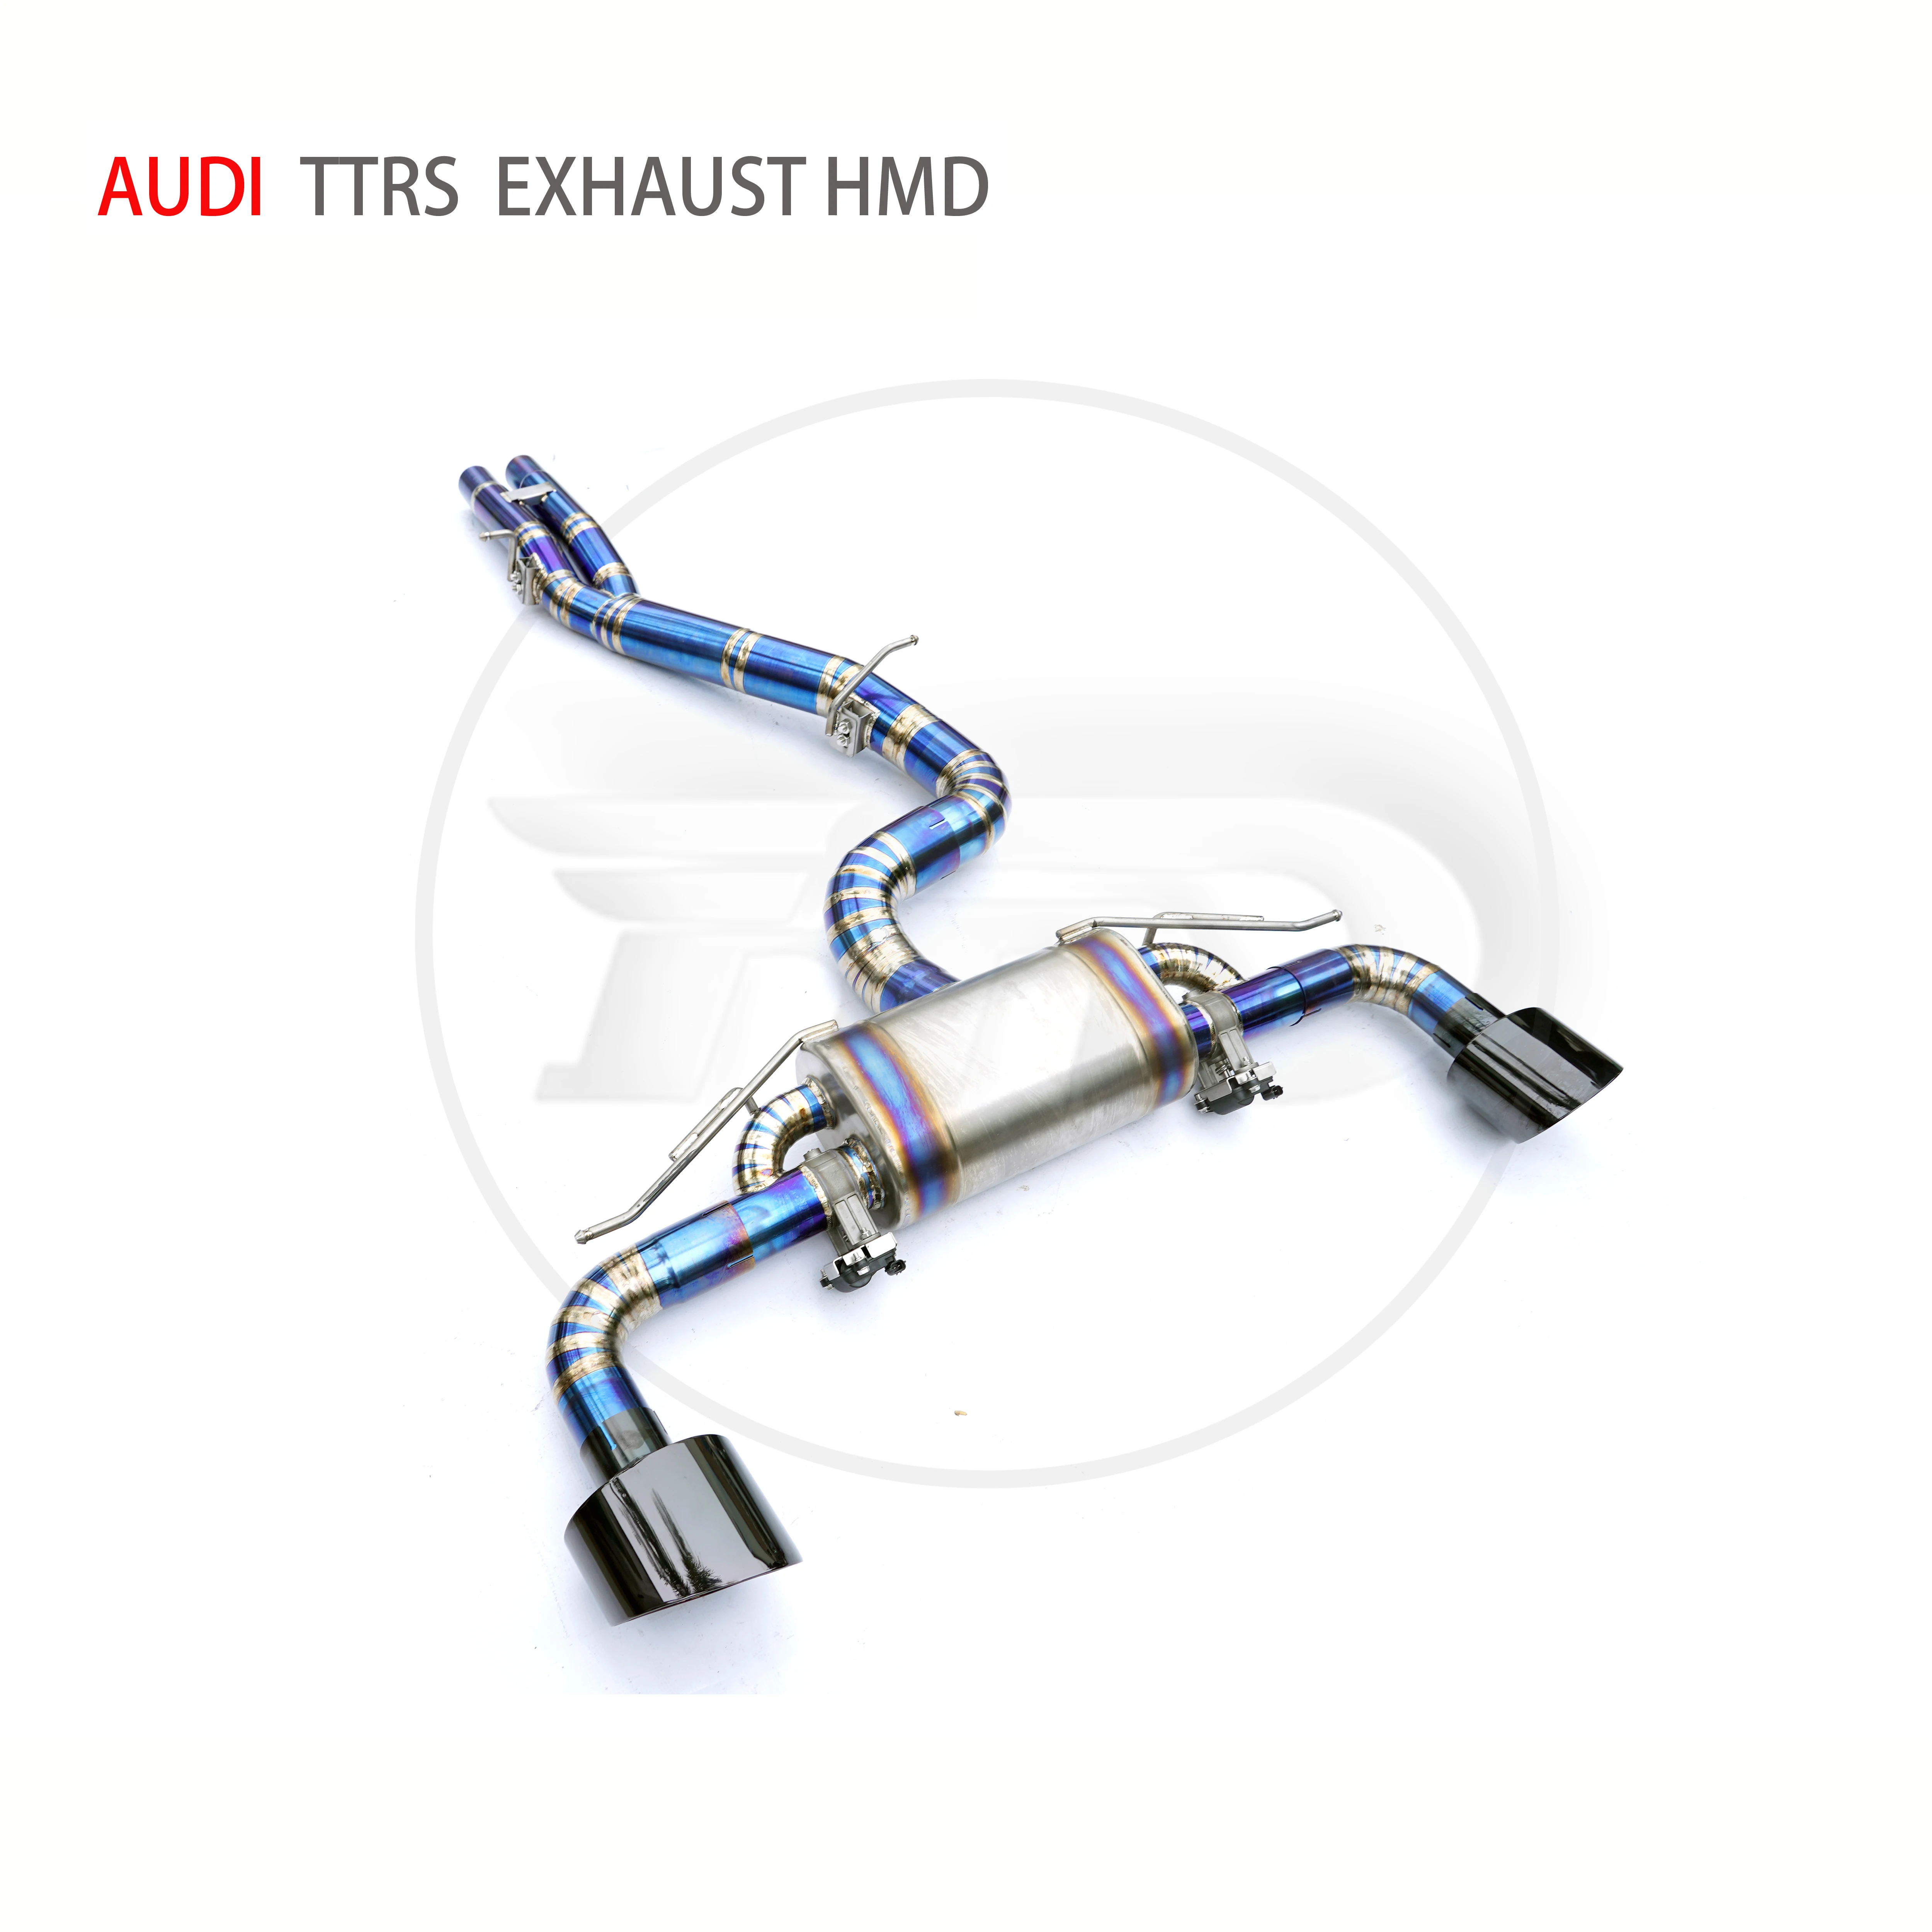 

Titanium Alloy Exhaust Pipe Manifold Downpipe is Suitable for Audi TTRS Auto Modification Electronic Valve